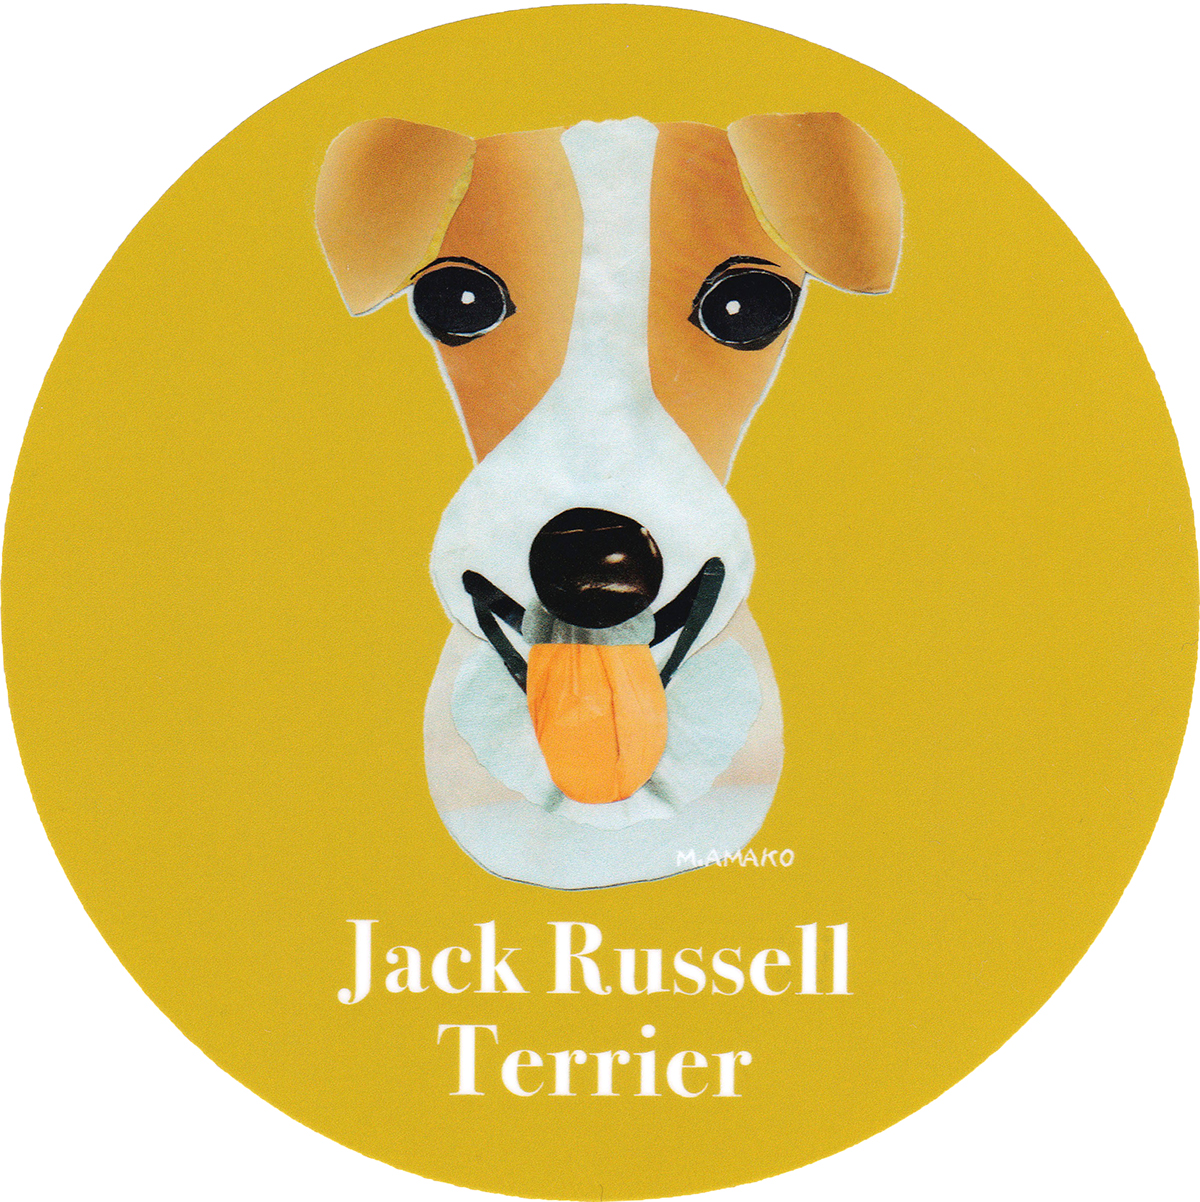 Adobe Portfolio jack russell terrier cut-outs 切り紙絵 cut-outs dog